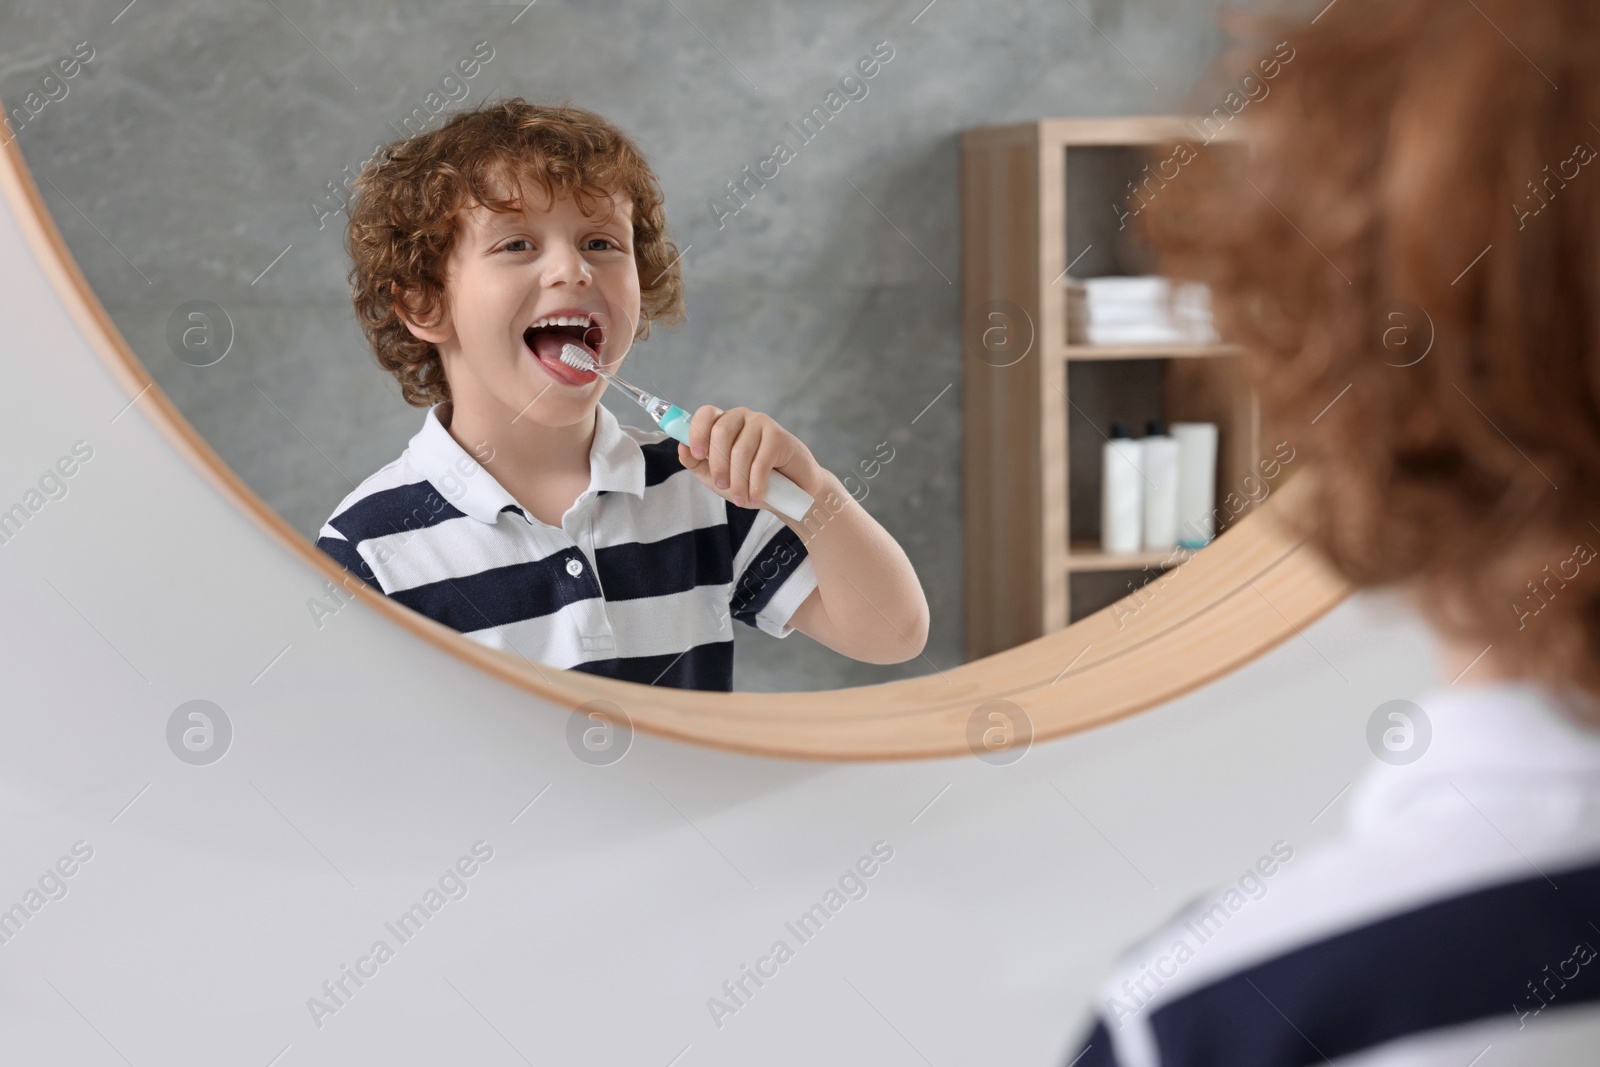 Photo of Cute little boy brushing his teeth with electric toothbrush near mirror in bathroom